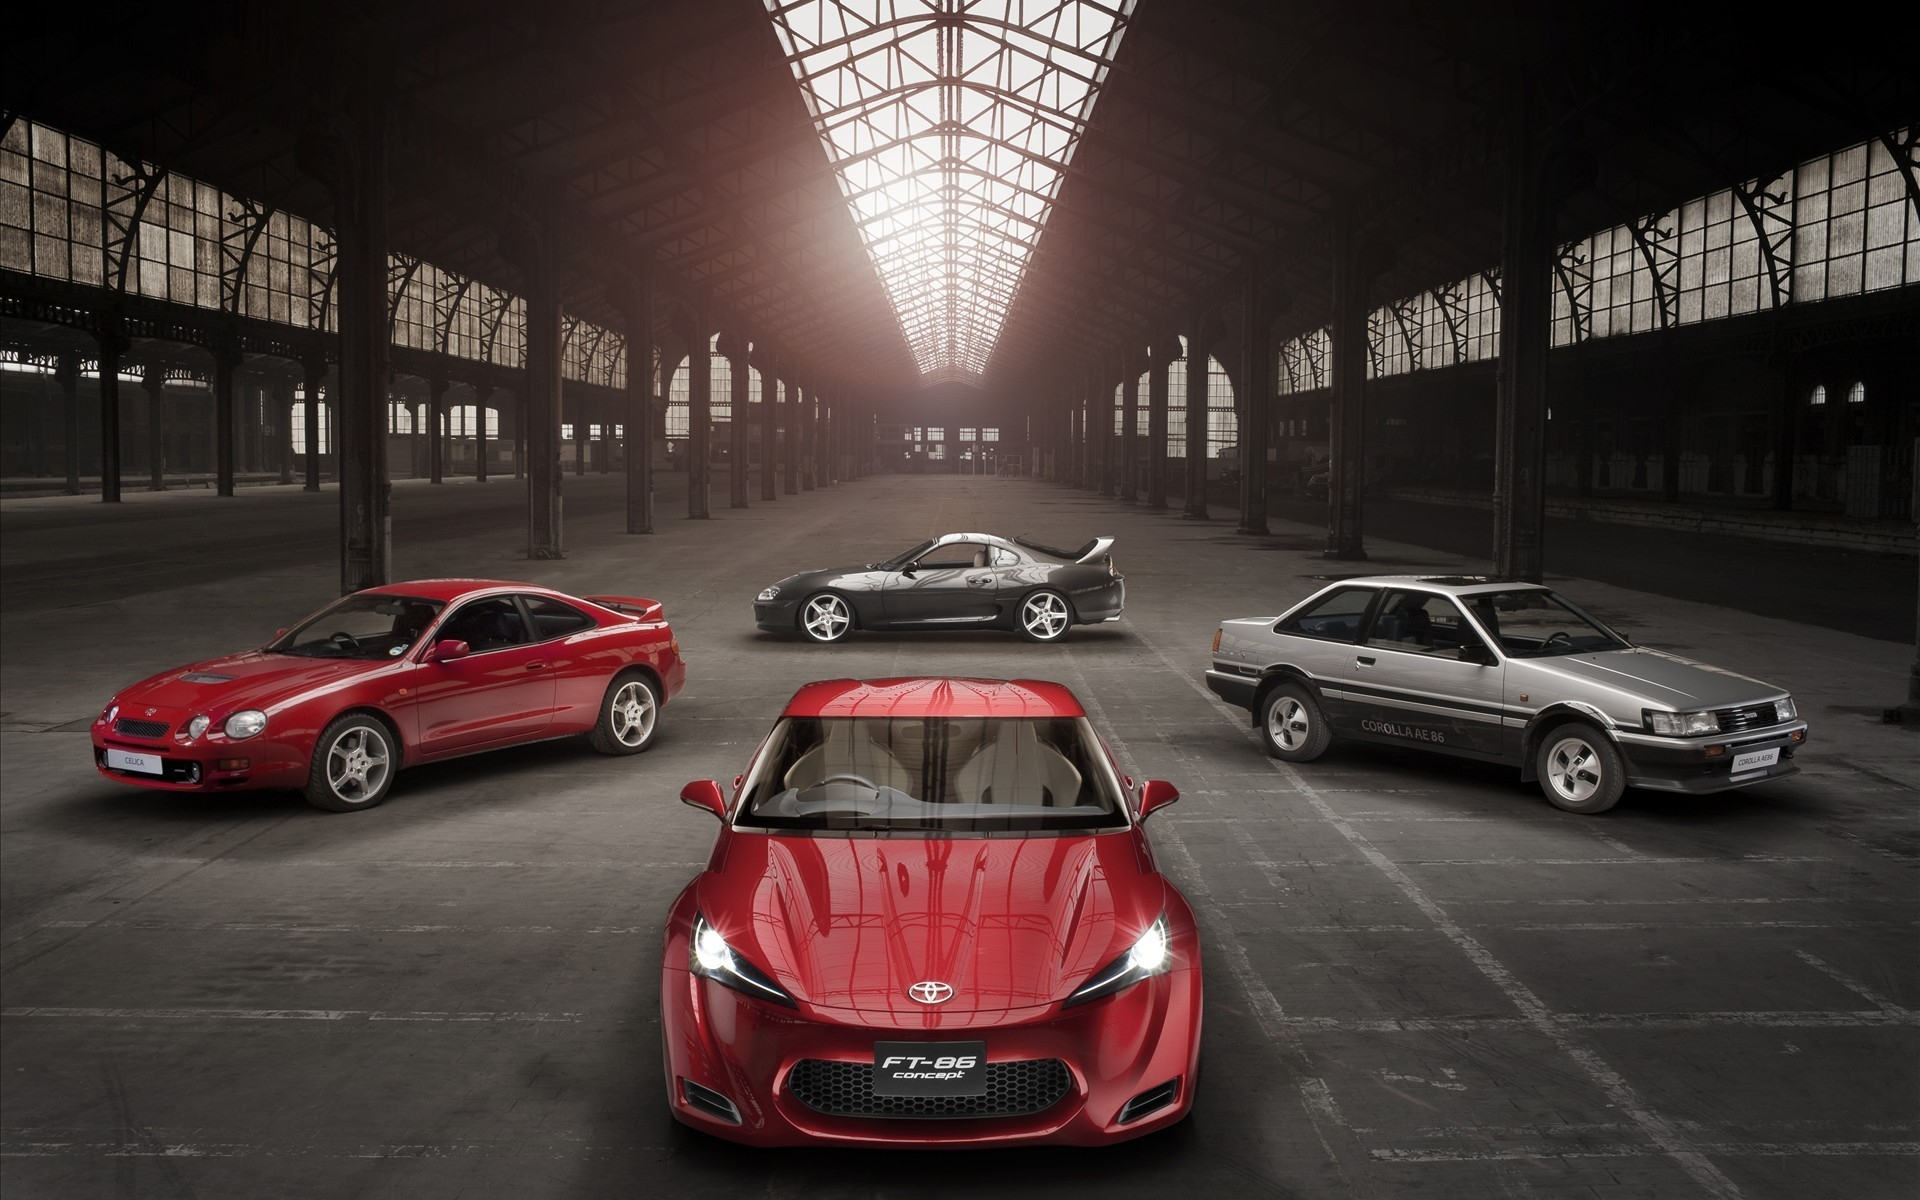 1920x1200 Wallpaper : red cars, sports car, Supra, silver cars, performance car, AE86, Celica, Toyota FT86, supercar, land vehicle, automotive design, automobile make, luxury vehicle, race track questionablecontext 243709 HD Wallpapers